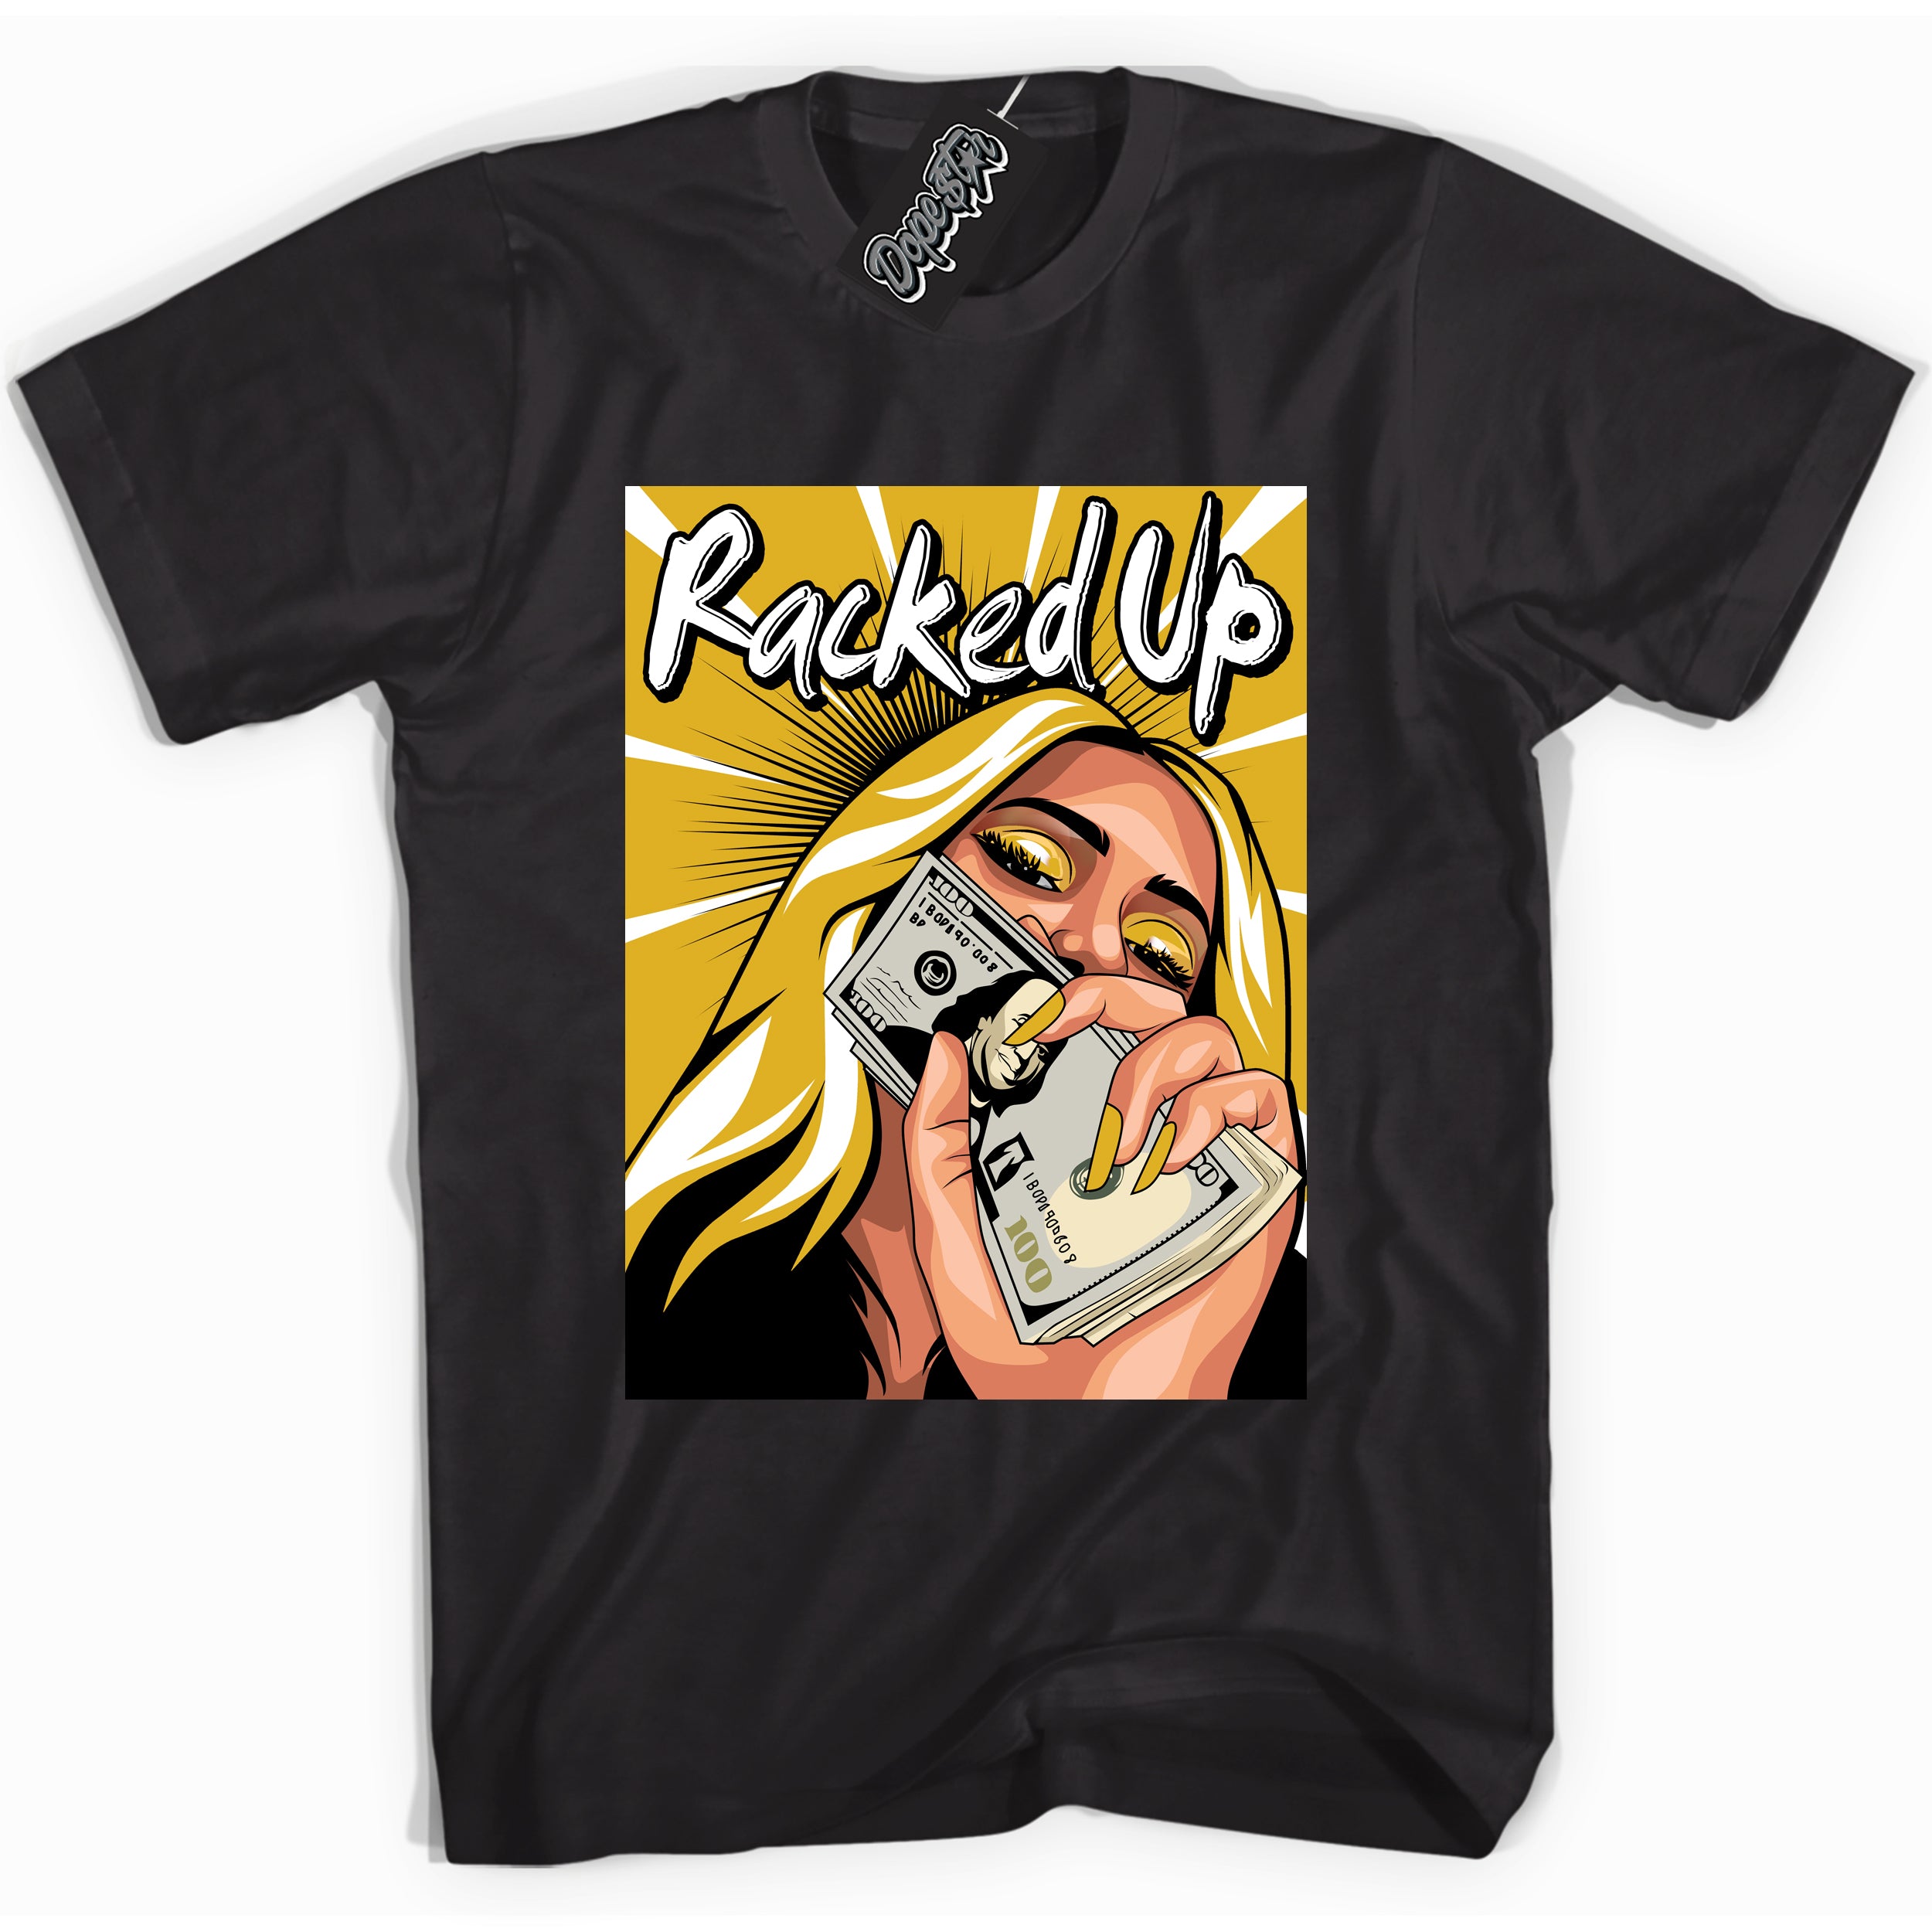 Cool black Shirt with “ Racked Up” design that perfectly matches Yellow Ochre 6s Sneakers.